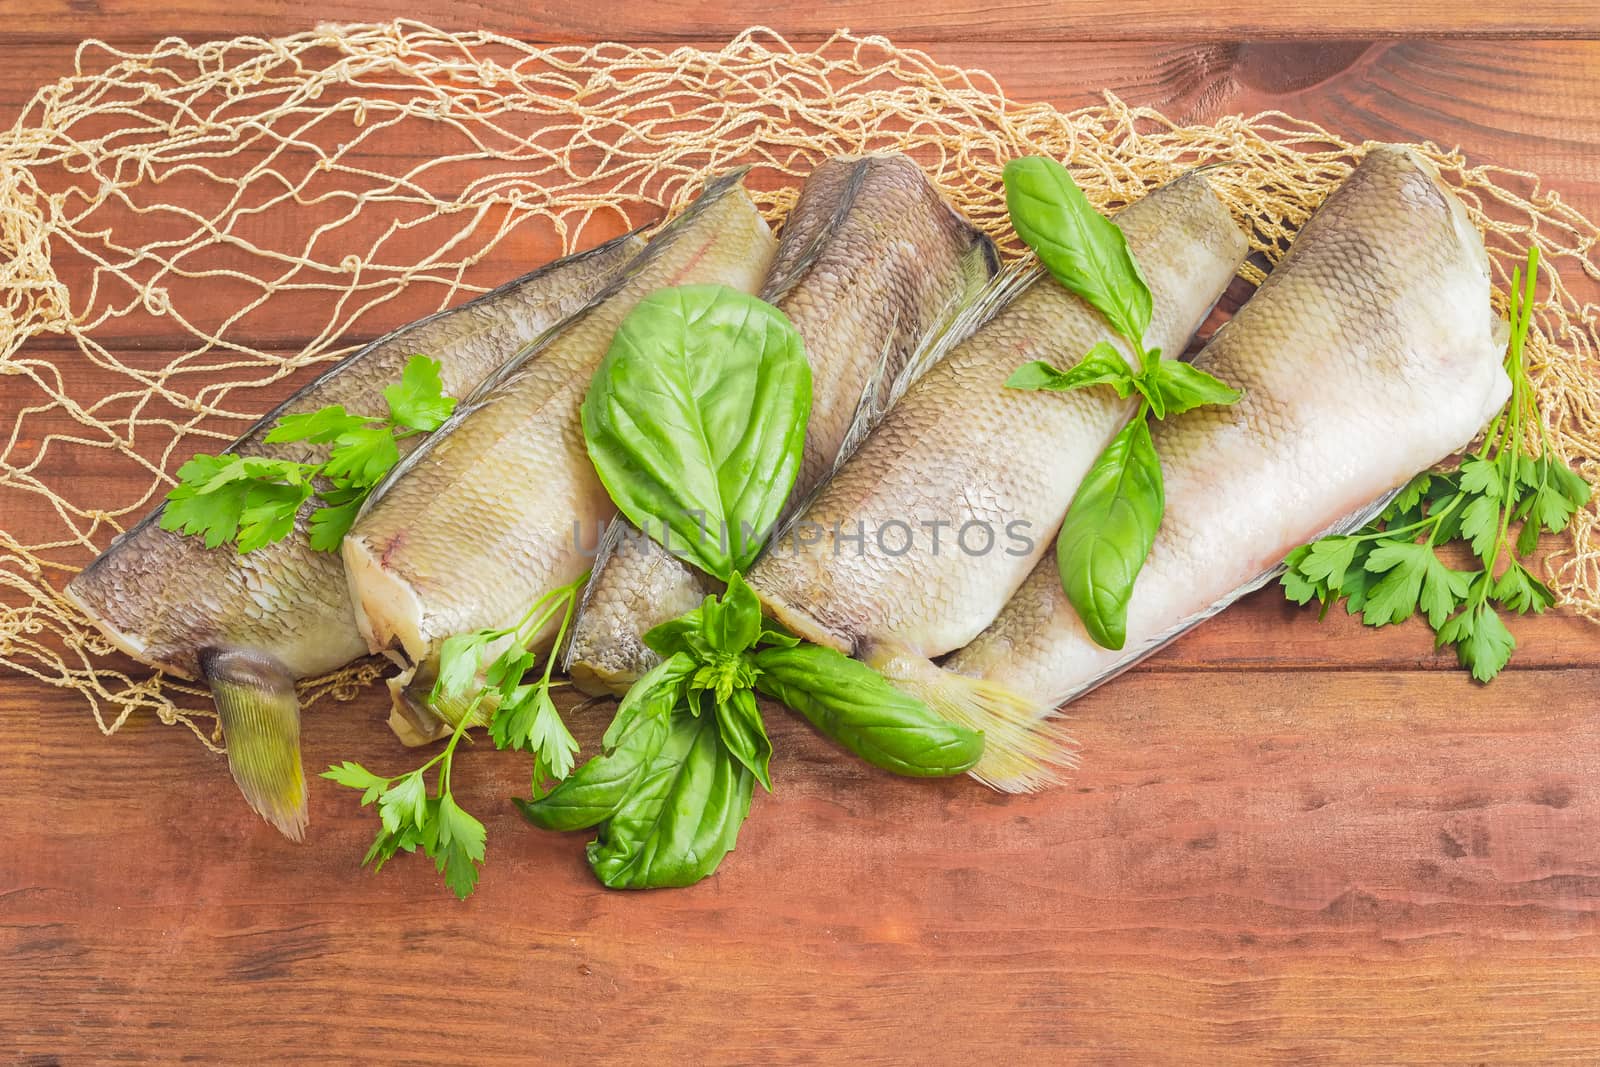 Several uncooked carcasses of the notothenia fish without of head and tail and twigs of basil and parsley on the fishing net on a dark wooden surface
